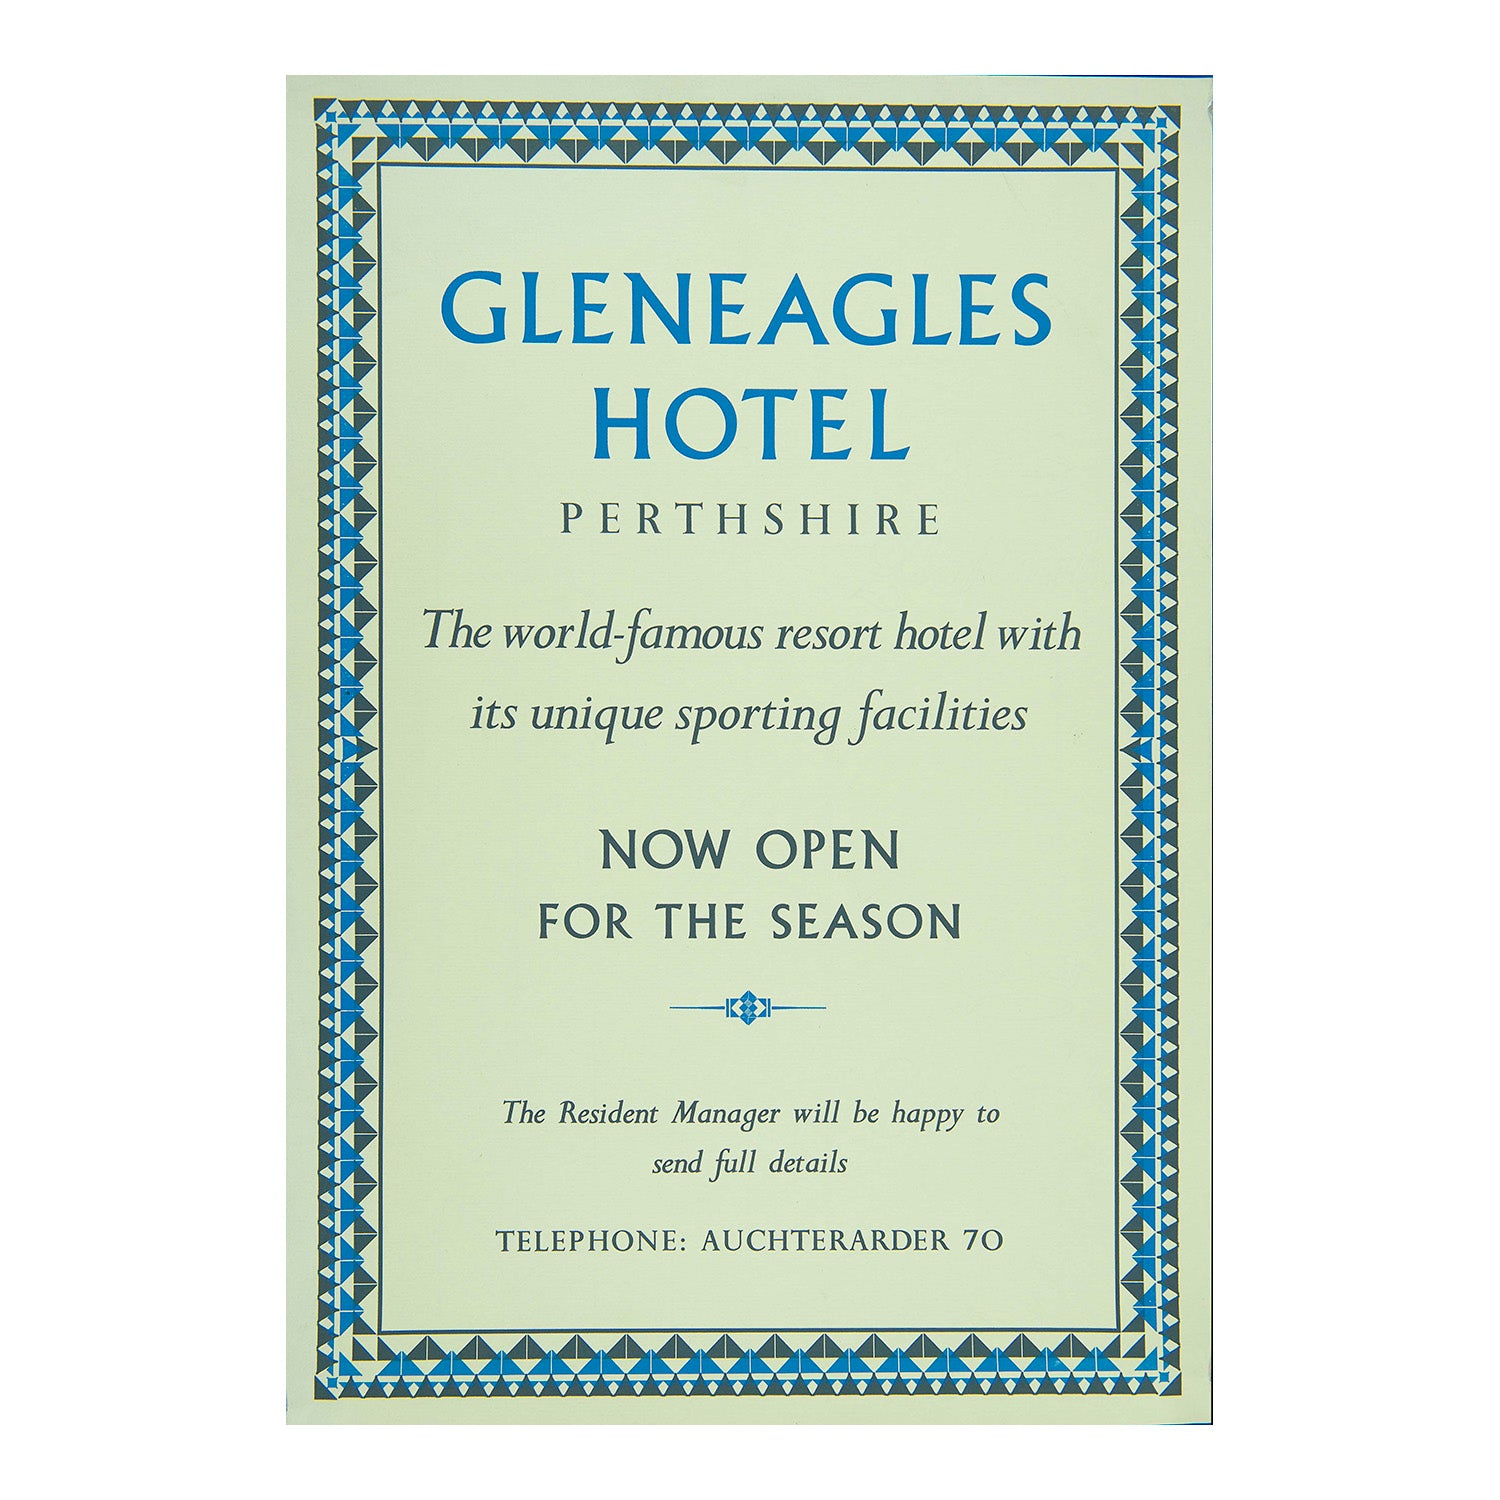  poster for the famous Gleneagles Hotel and golf resort, near Auchterarder, Scotland, c.1960-65. The poster, with decorative border designed in-house at the Curwen Press, promotes “The world-famous resort hotel with its unique sporting facilities”. 